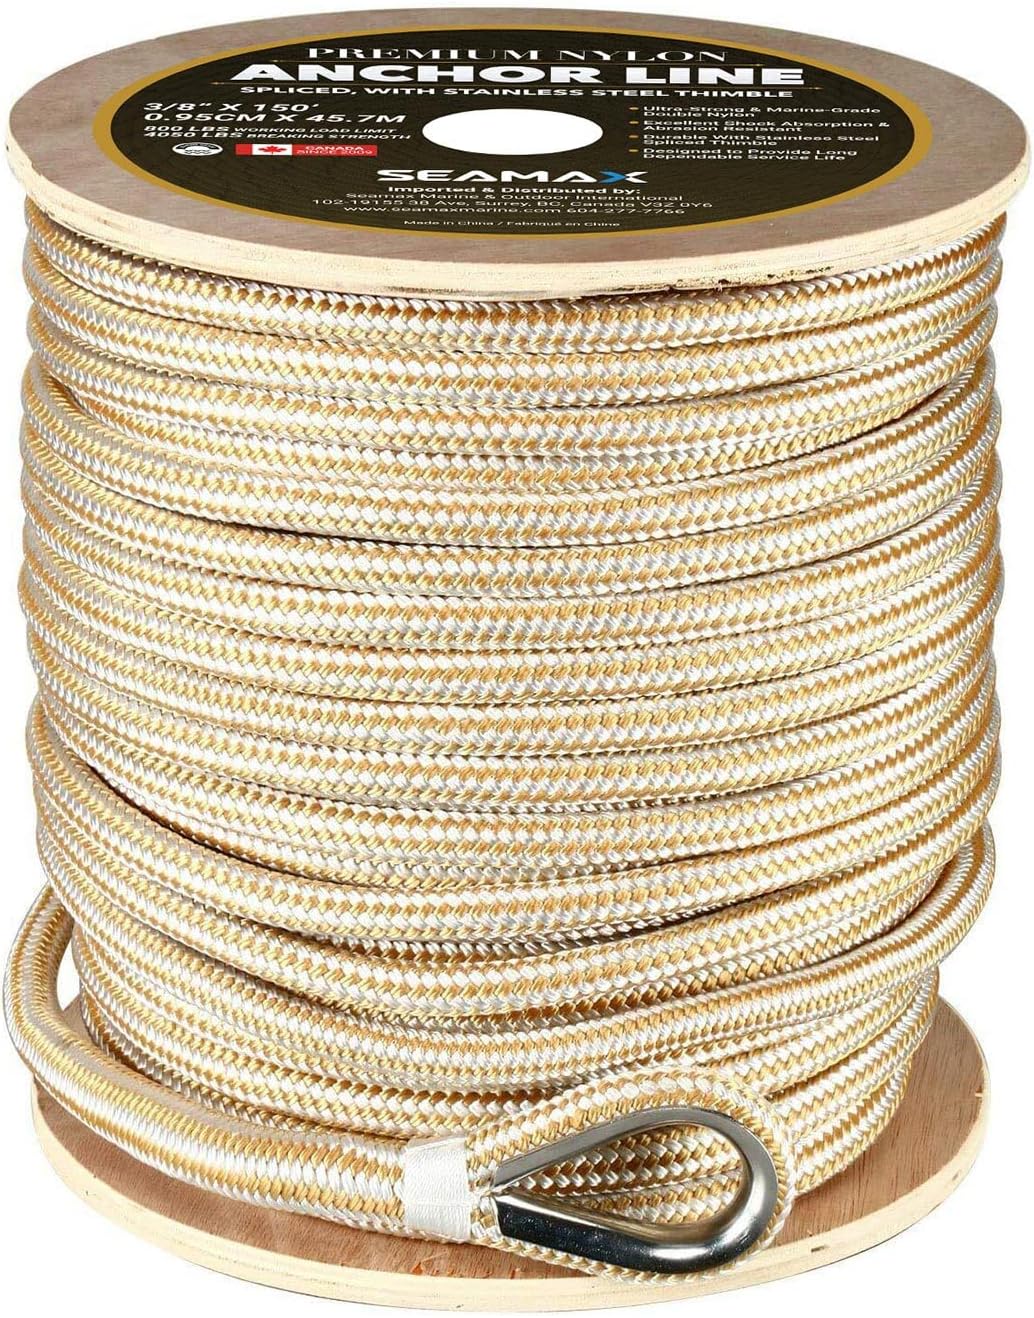 Seamax Marine 1/2 Inch 150 Ft/150Ft/200Ft Double Braided Nylon Anchor